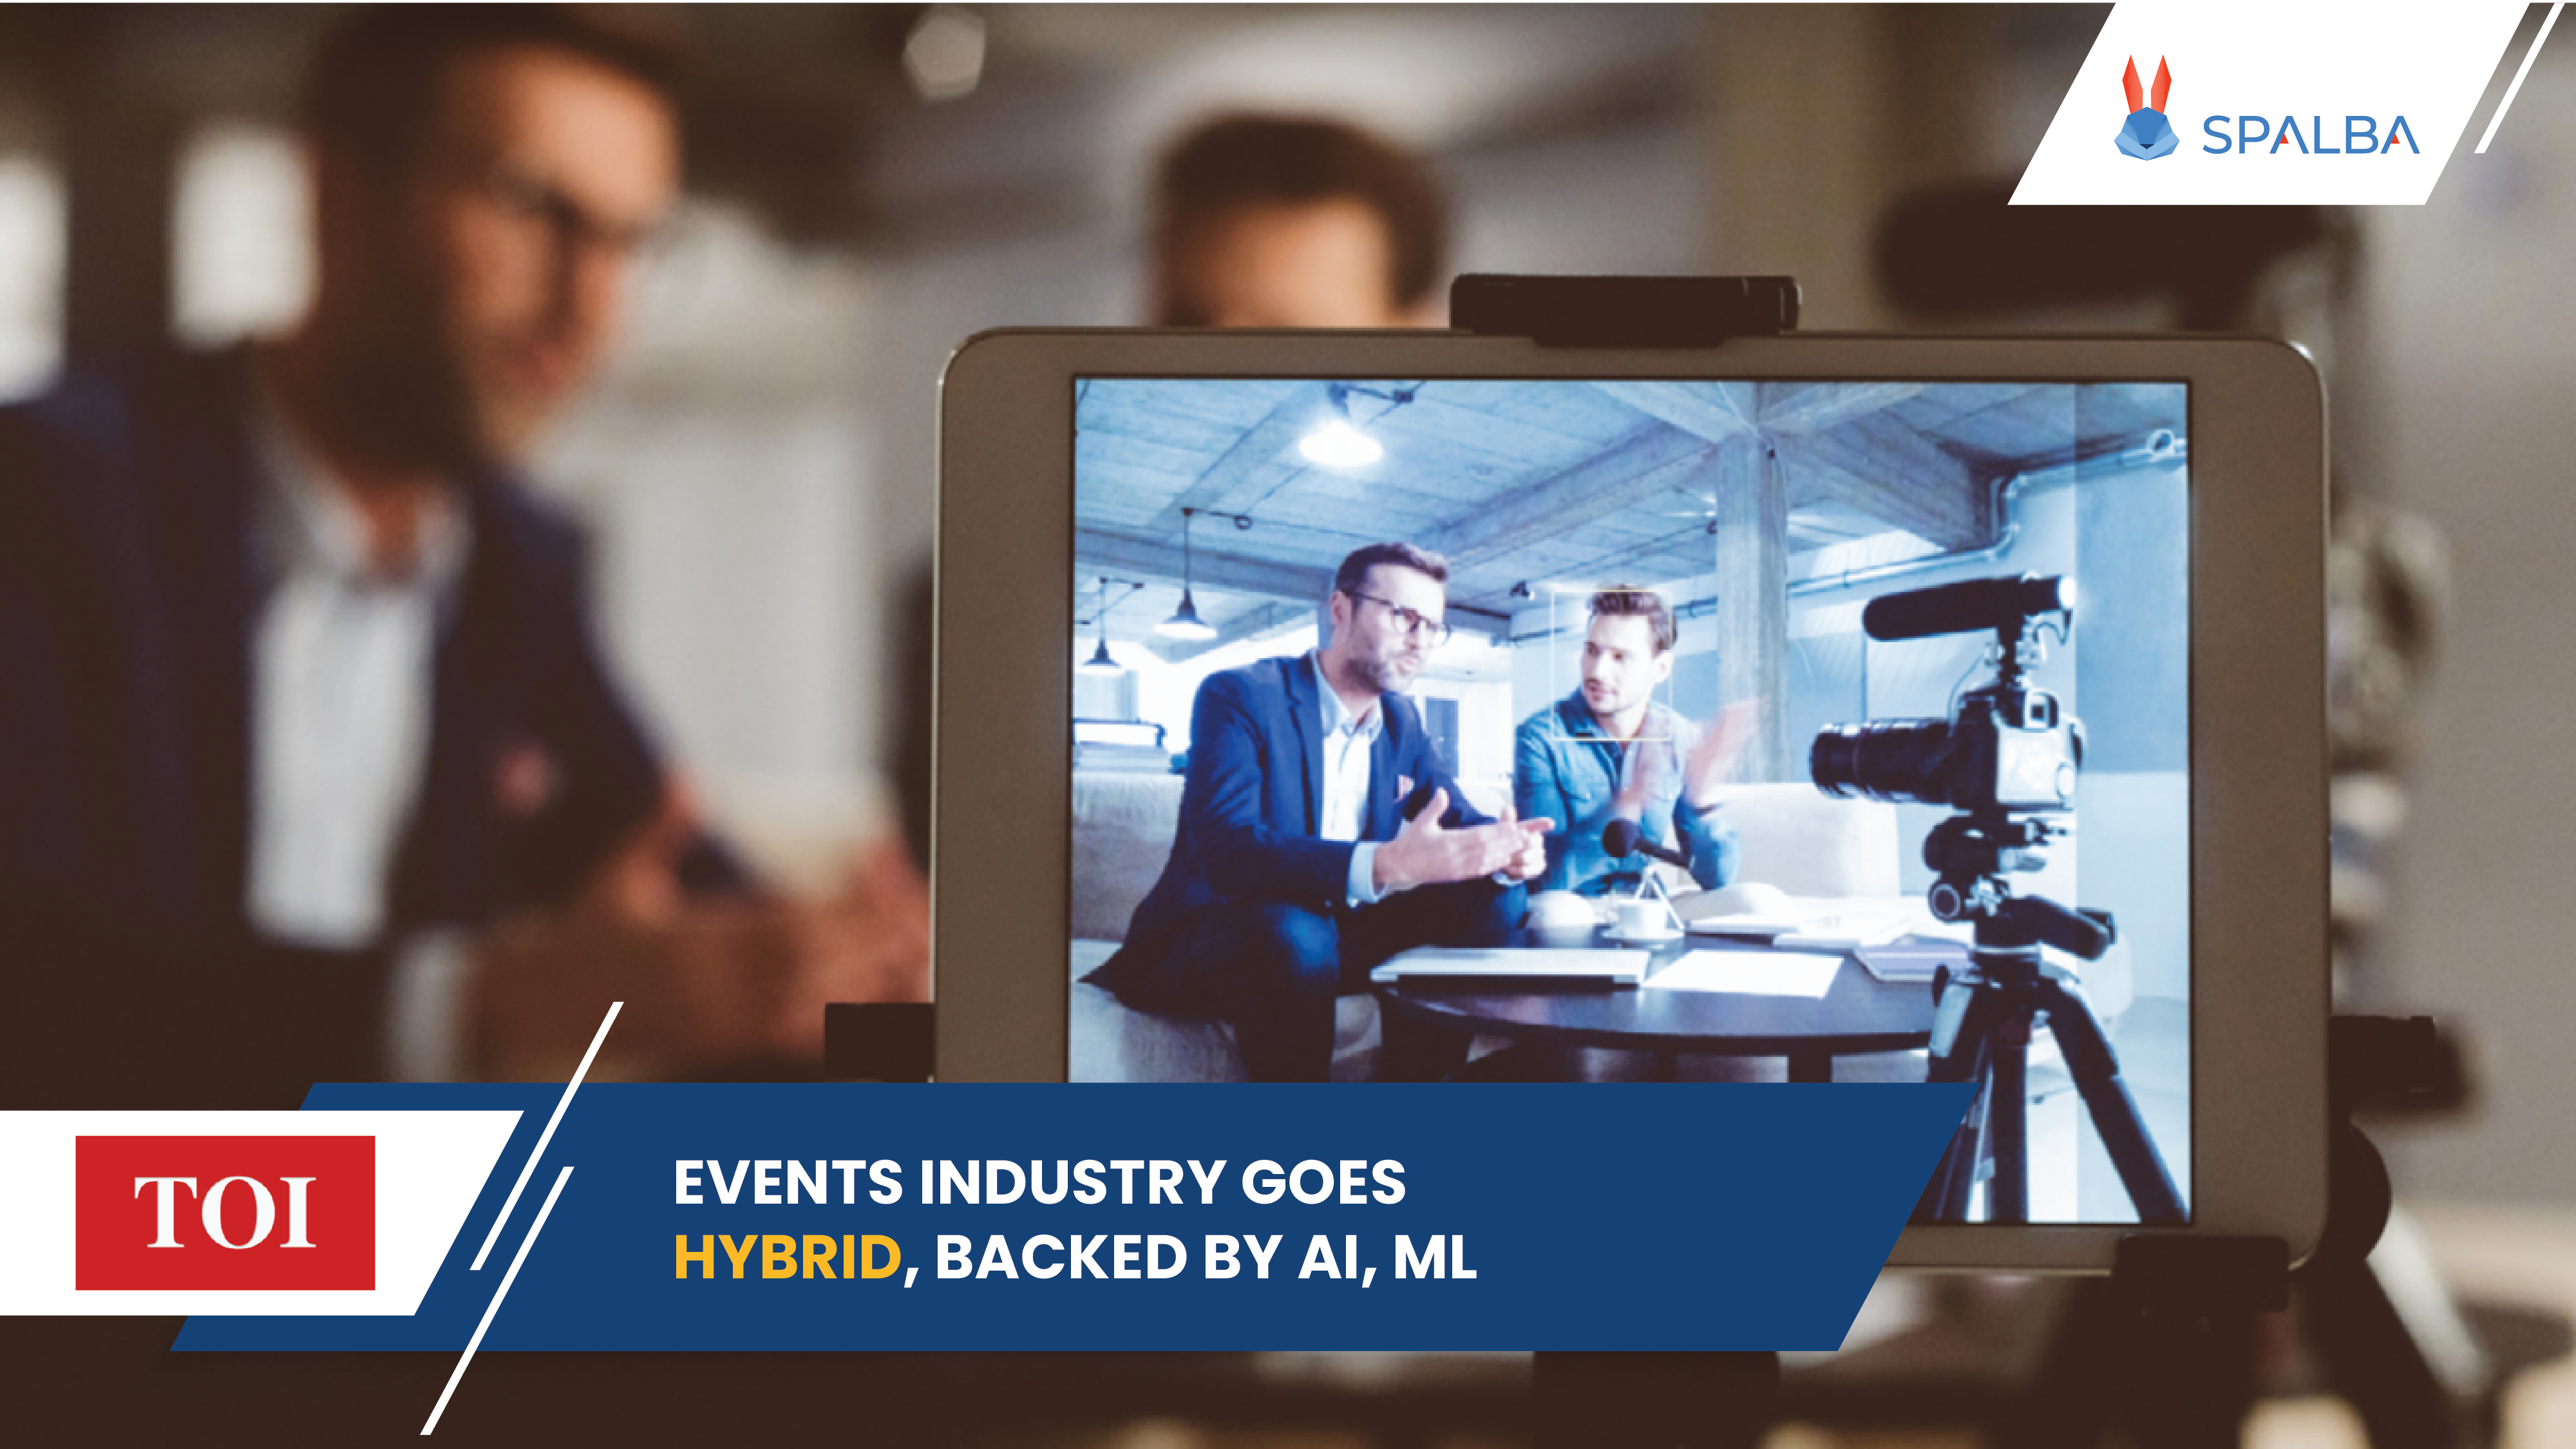 Events industry goes hybrid, backed by AI, ML